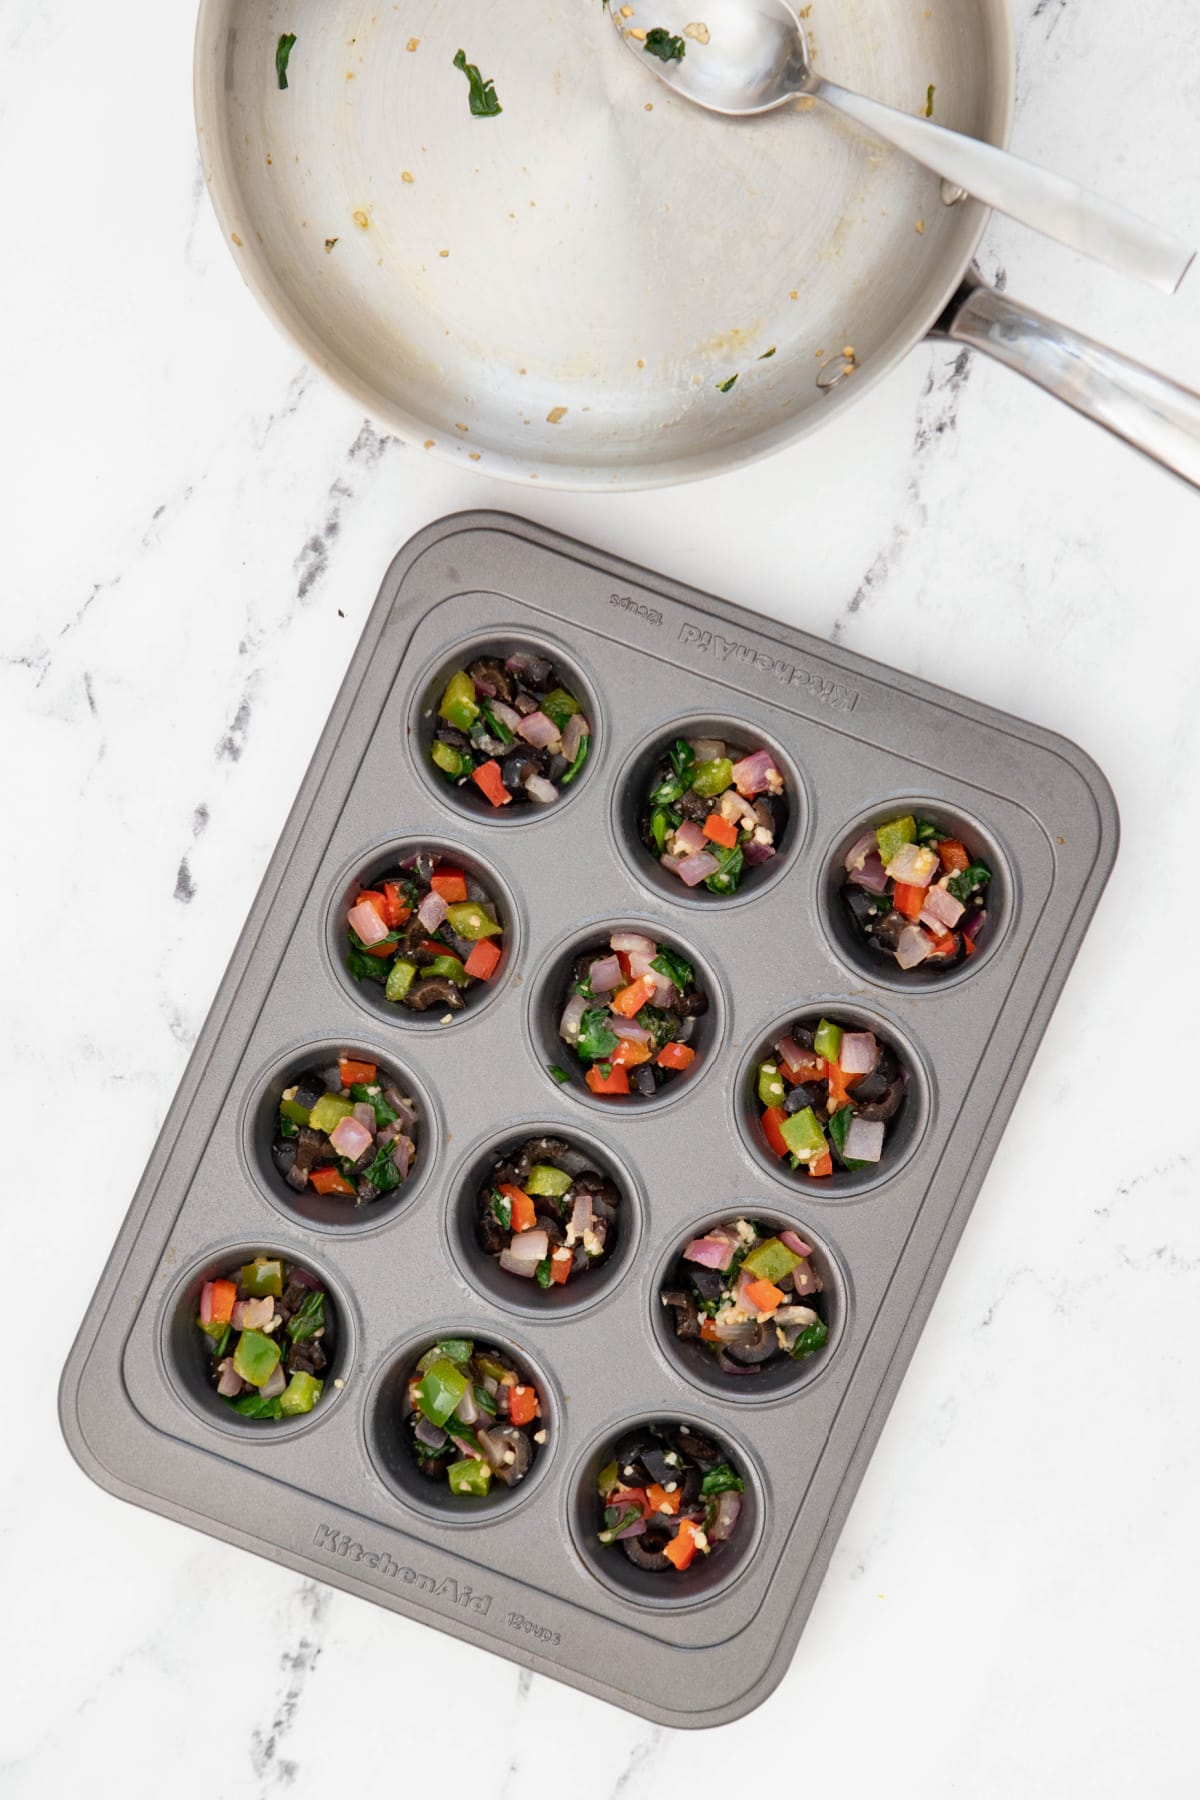 Sauteed vegetables in mini muffin pan